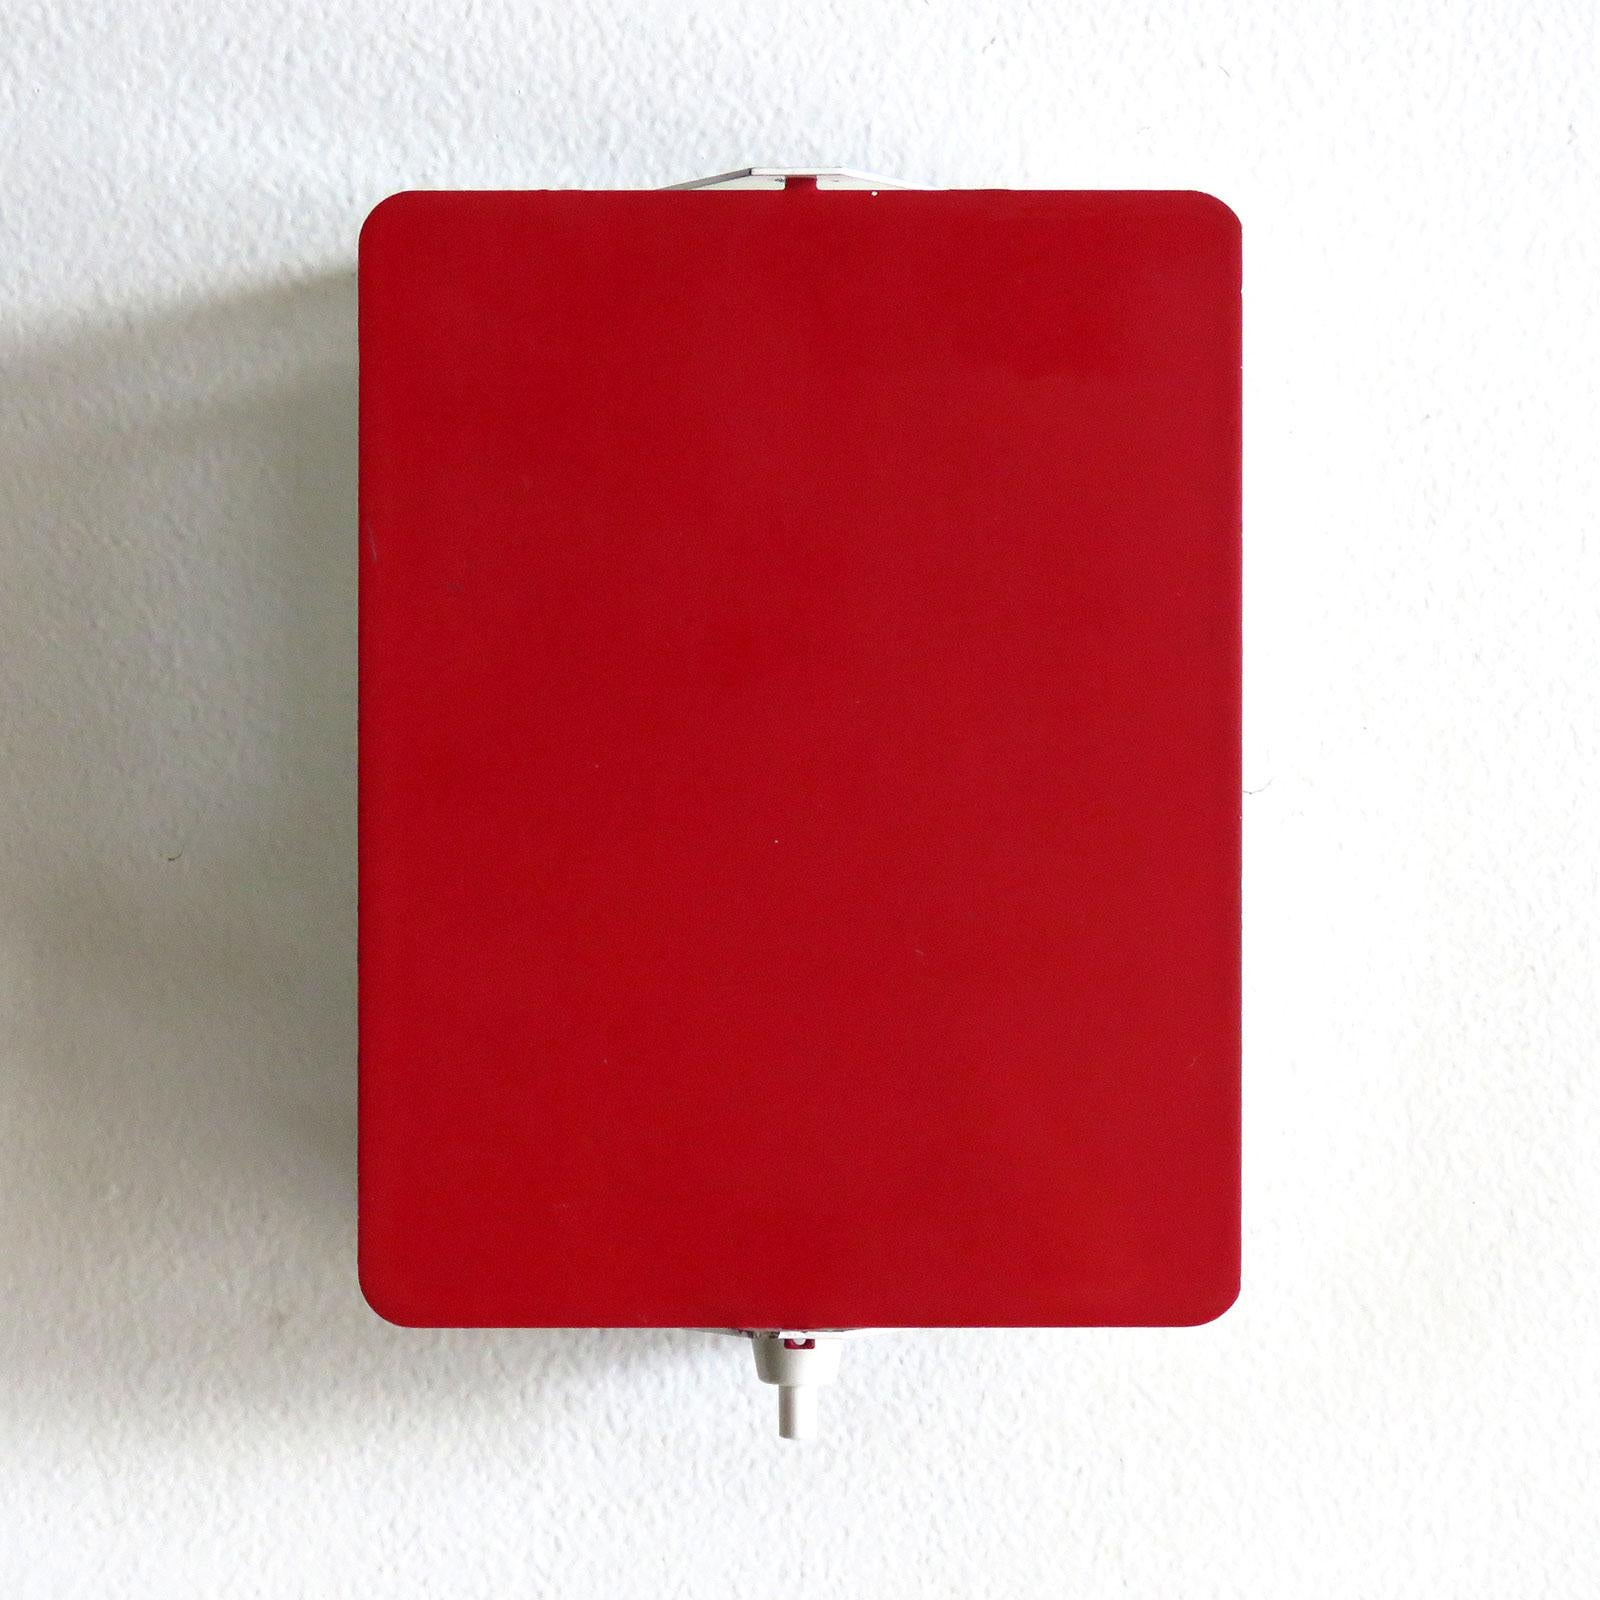 Iconic enameled wall lights by Charlotte Perriand with adjustable reflectors in rare red finish, optional horizontal or vertical mount, manufactured and distributed by Steph Simon, Paris, marked, wired for US standards, one E12 socket each, max.